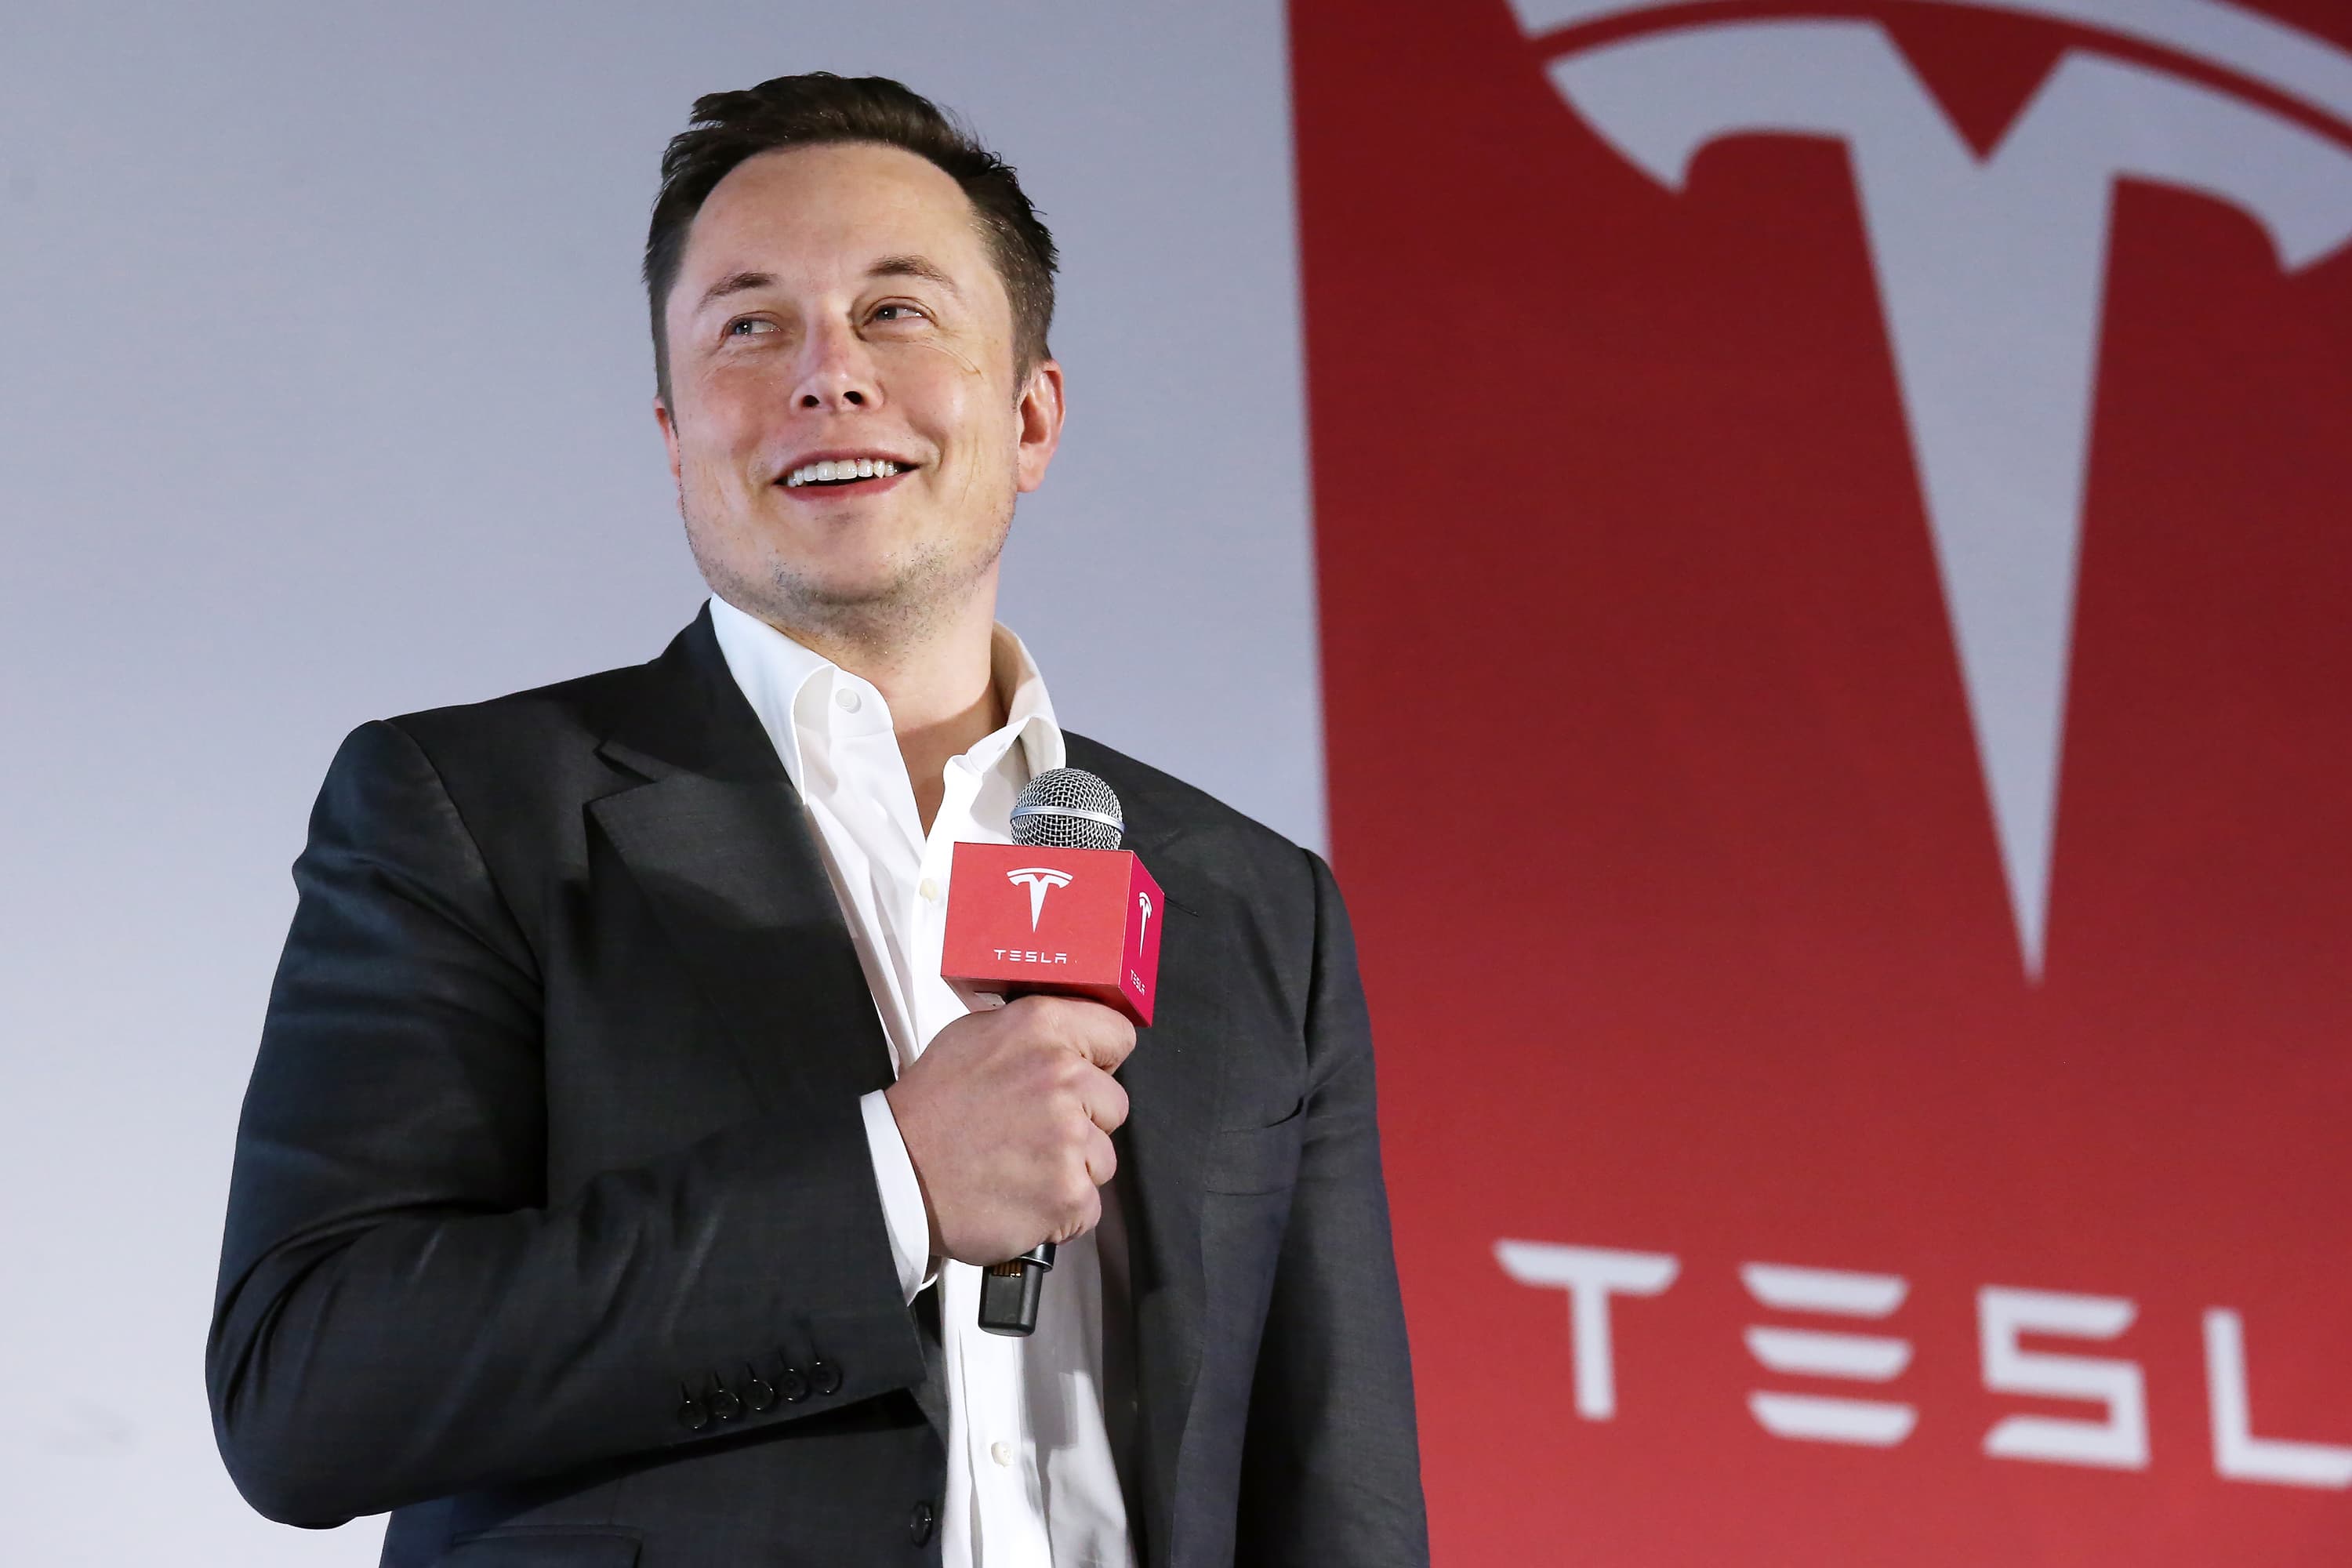 Test drive that influenced Musk to make electric cars, invest in Tesla